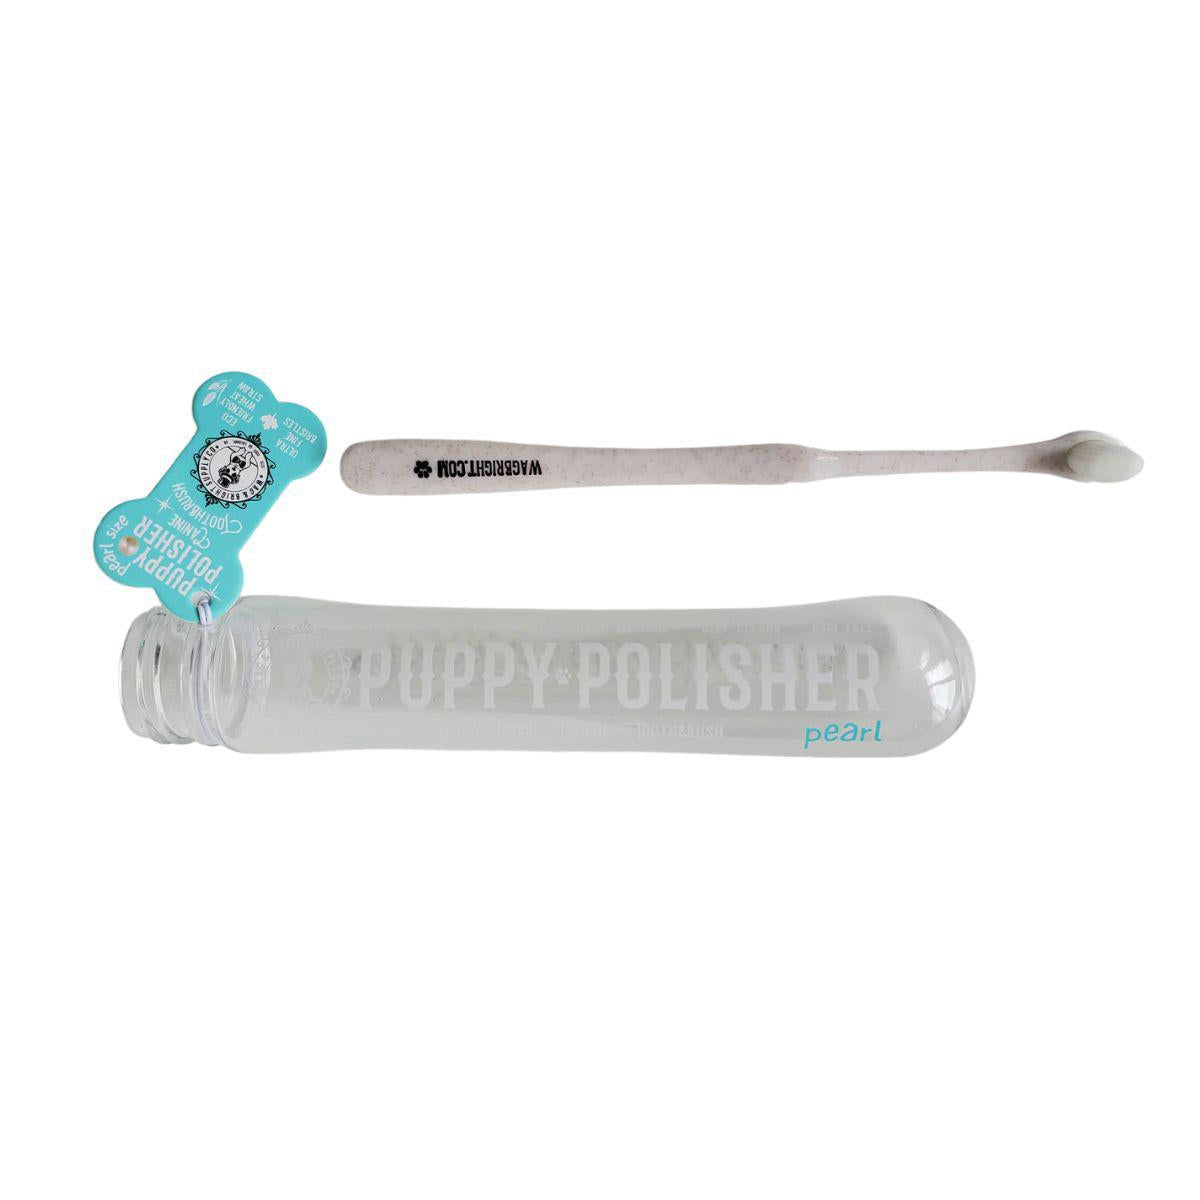 Wag & Bright - Puppy Polisher Toothbrush